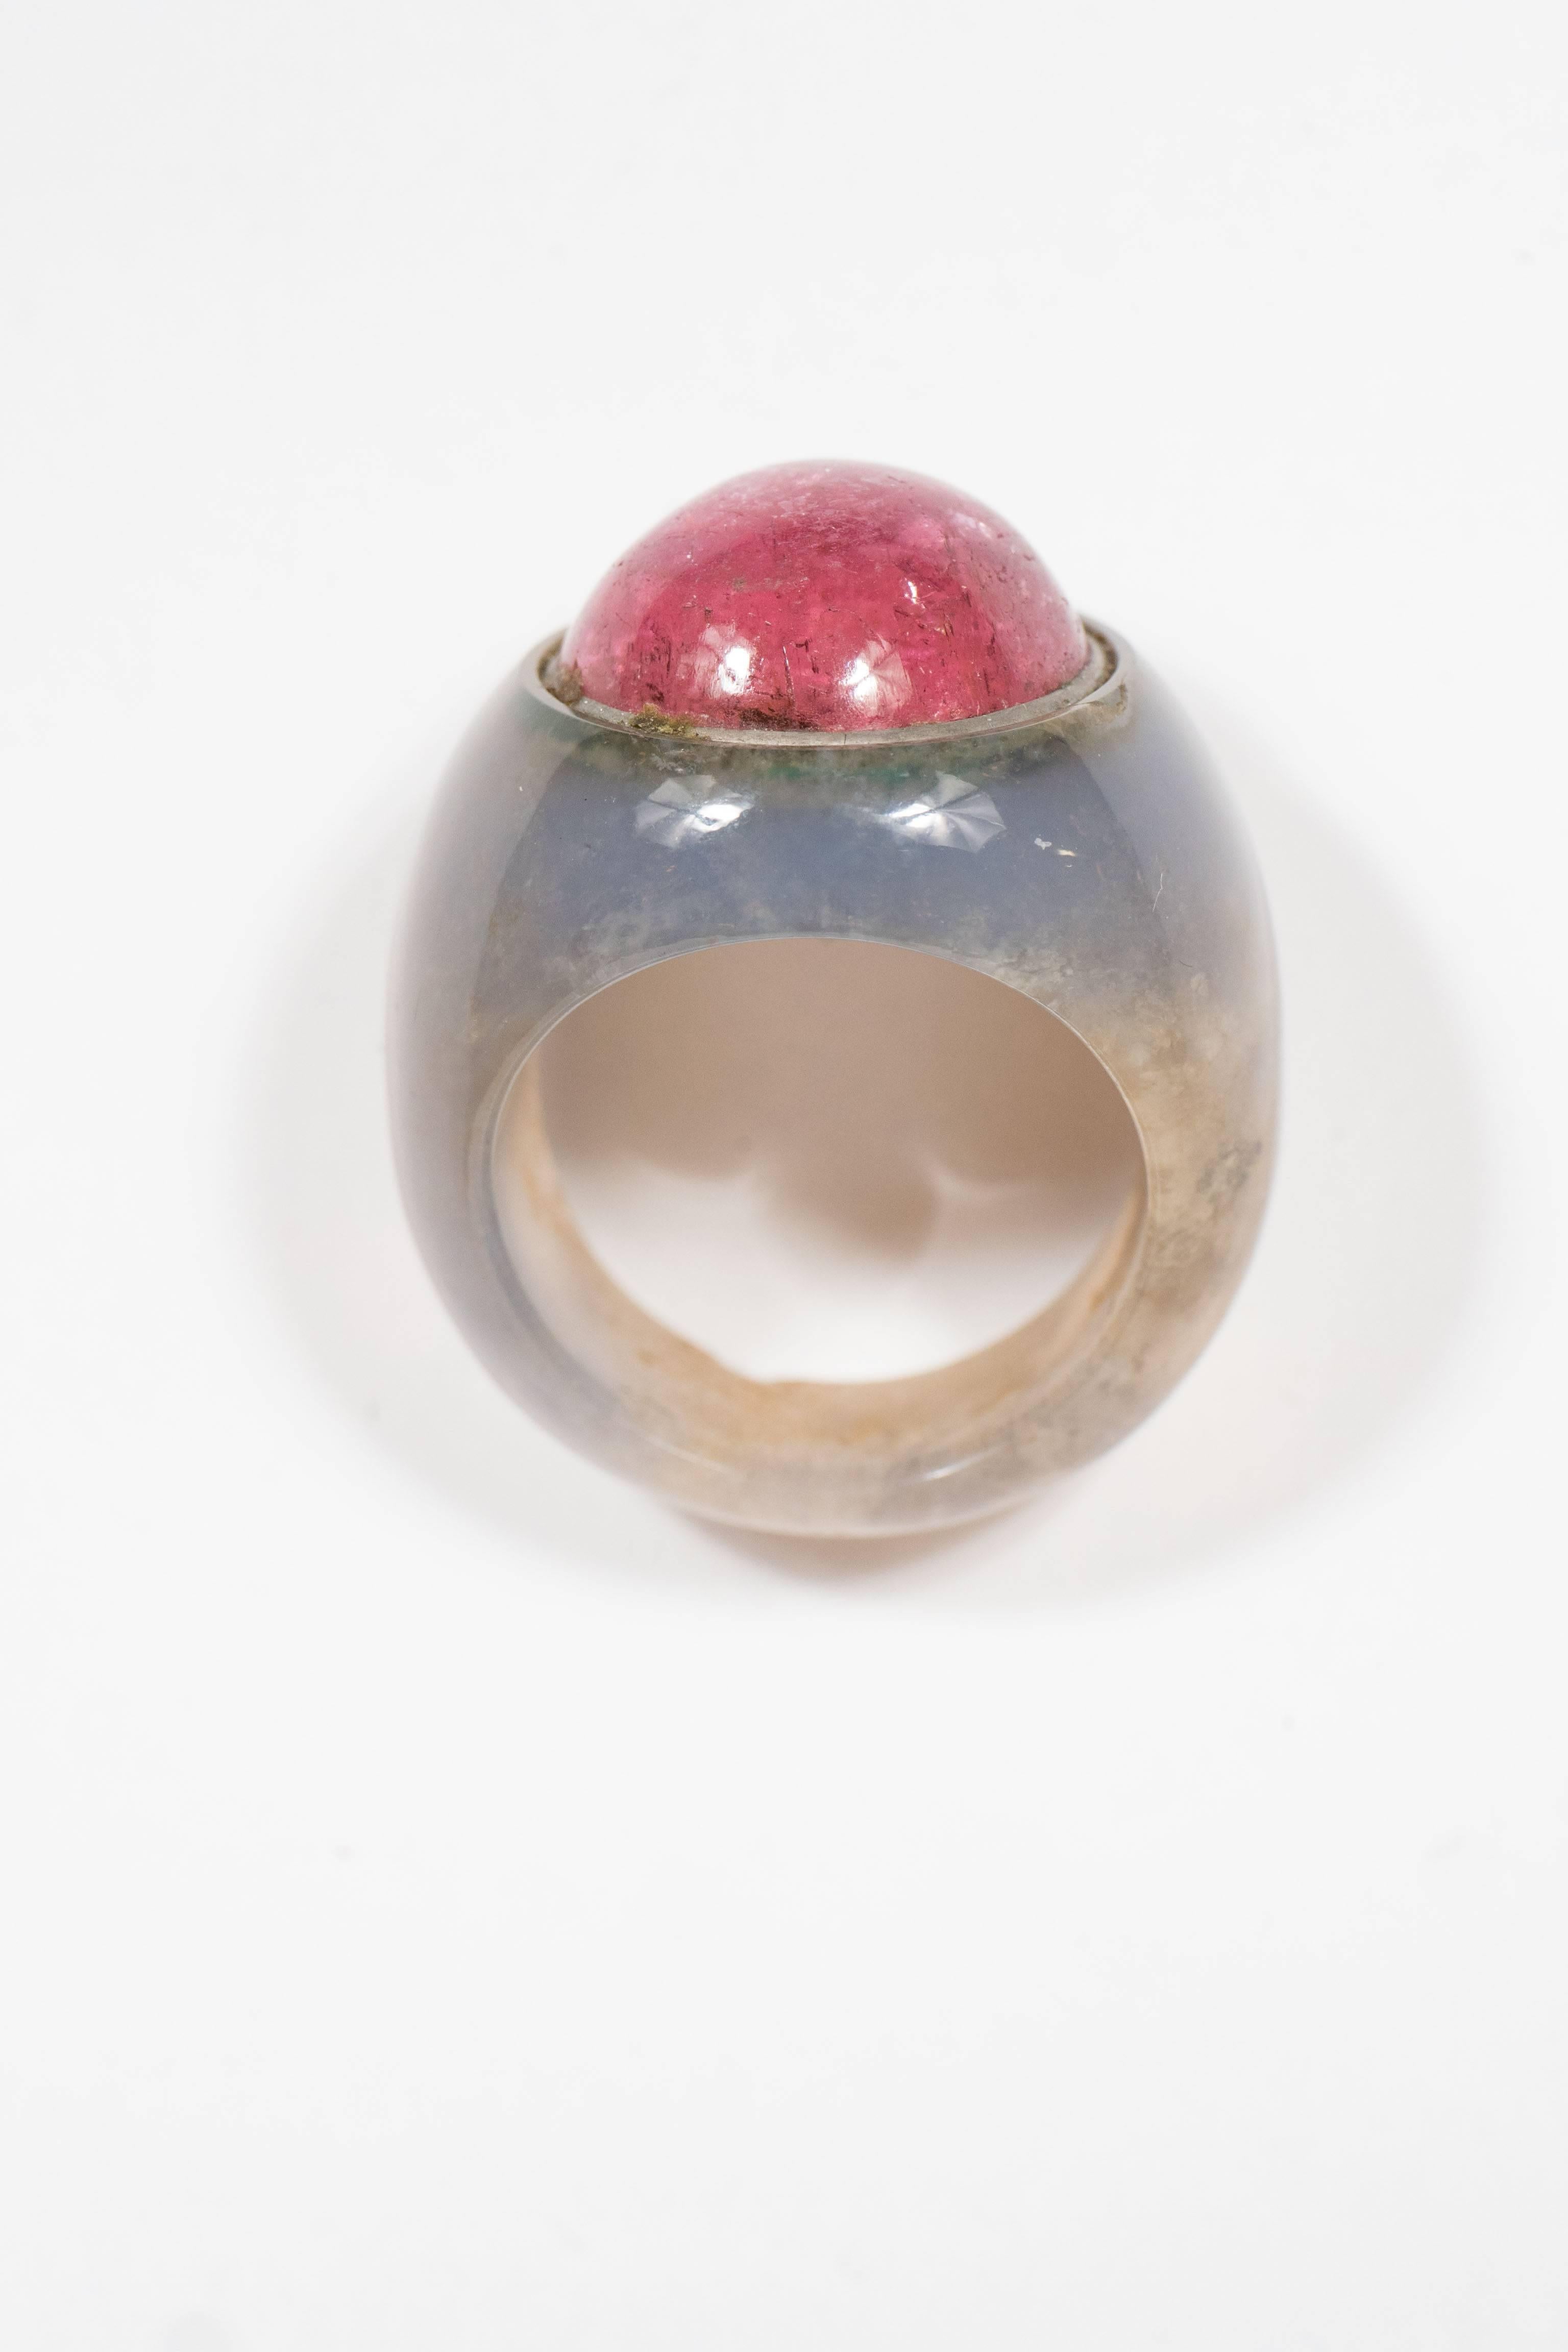 The mounting is composed of carved hard-stone, possibly a variety of chalcedony, centering one round cabochon pink tourmaline measuring approximately 14.8 mm. Ring is a size approximately 7. It is in excellent condition.
From the estate of Maxine